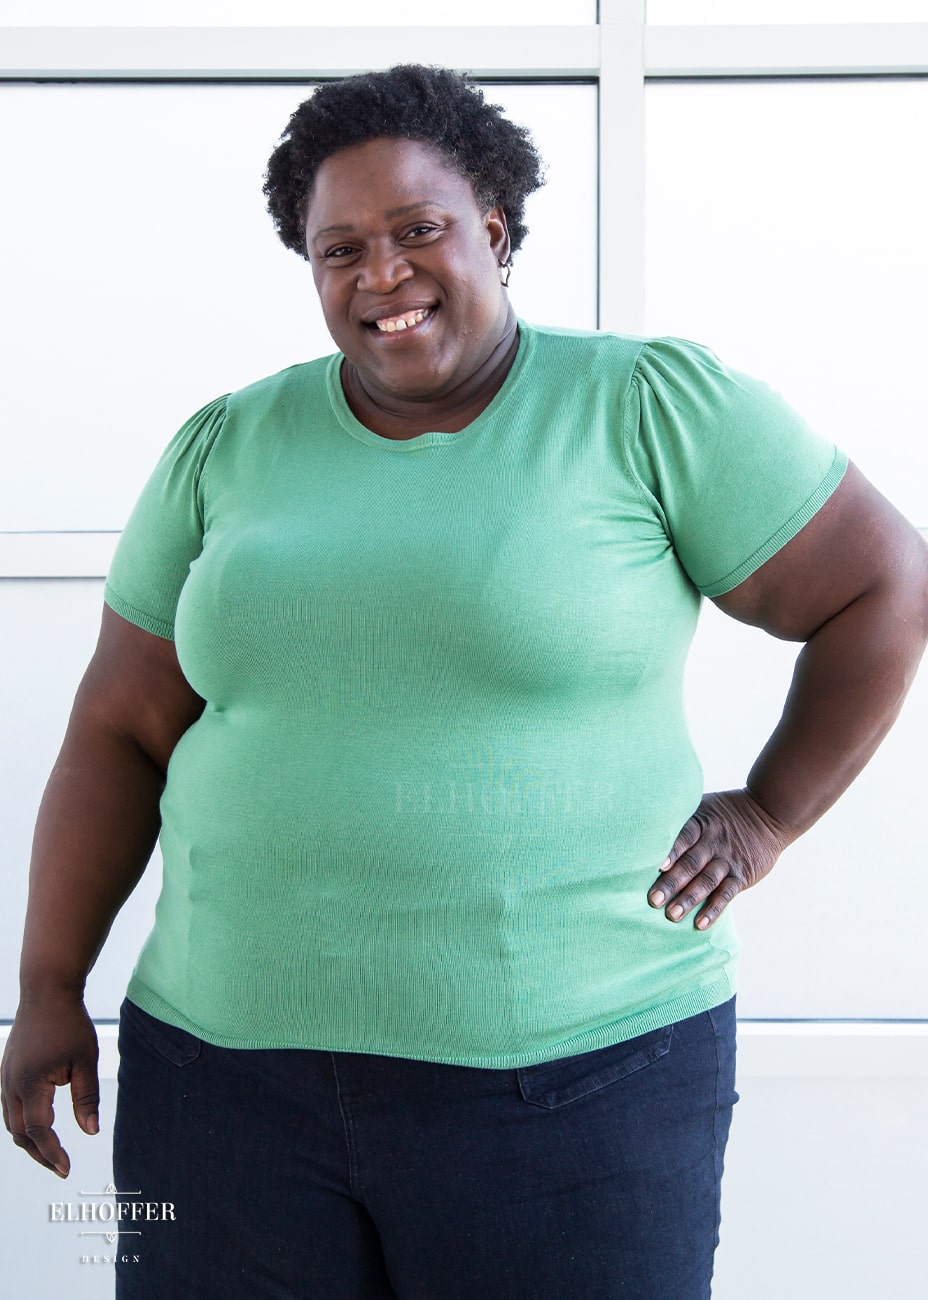 Adalgiza, a medium dark skinned 4xl model with short dark super curly hair, is smiling while wearing a short sleeve light weight sage green knit top. The top hits about mid hip in length and the sleeves have pleated gathering at the shoulders.